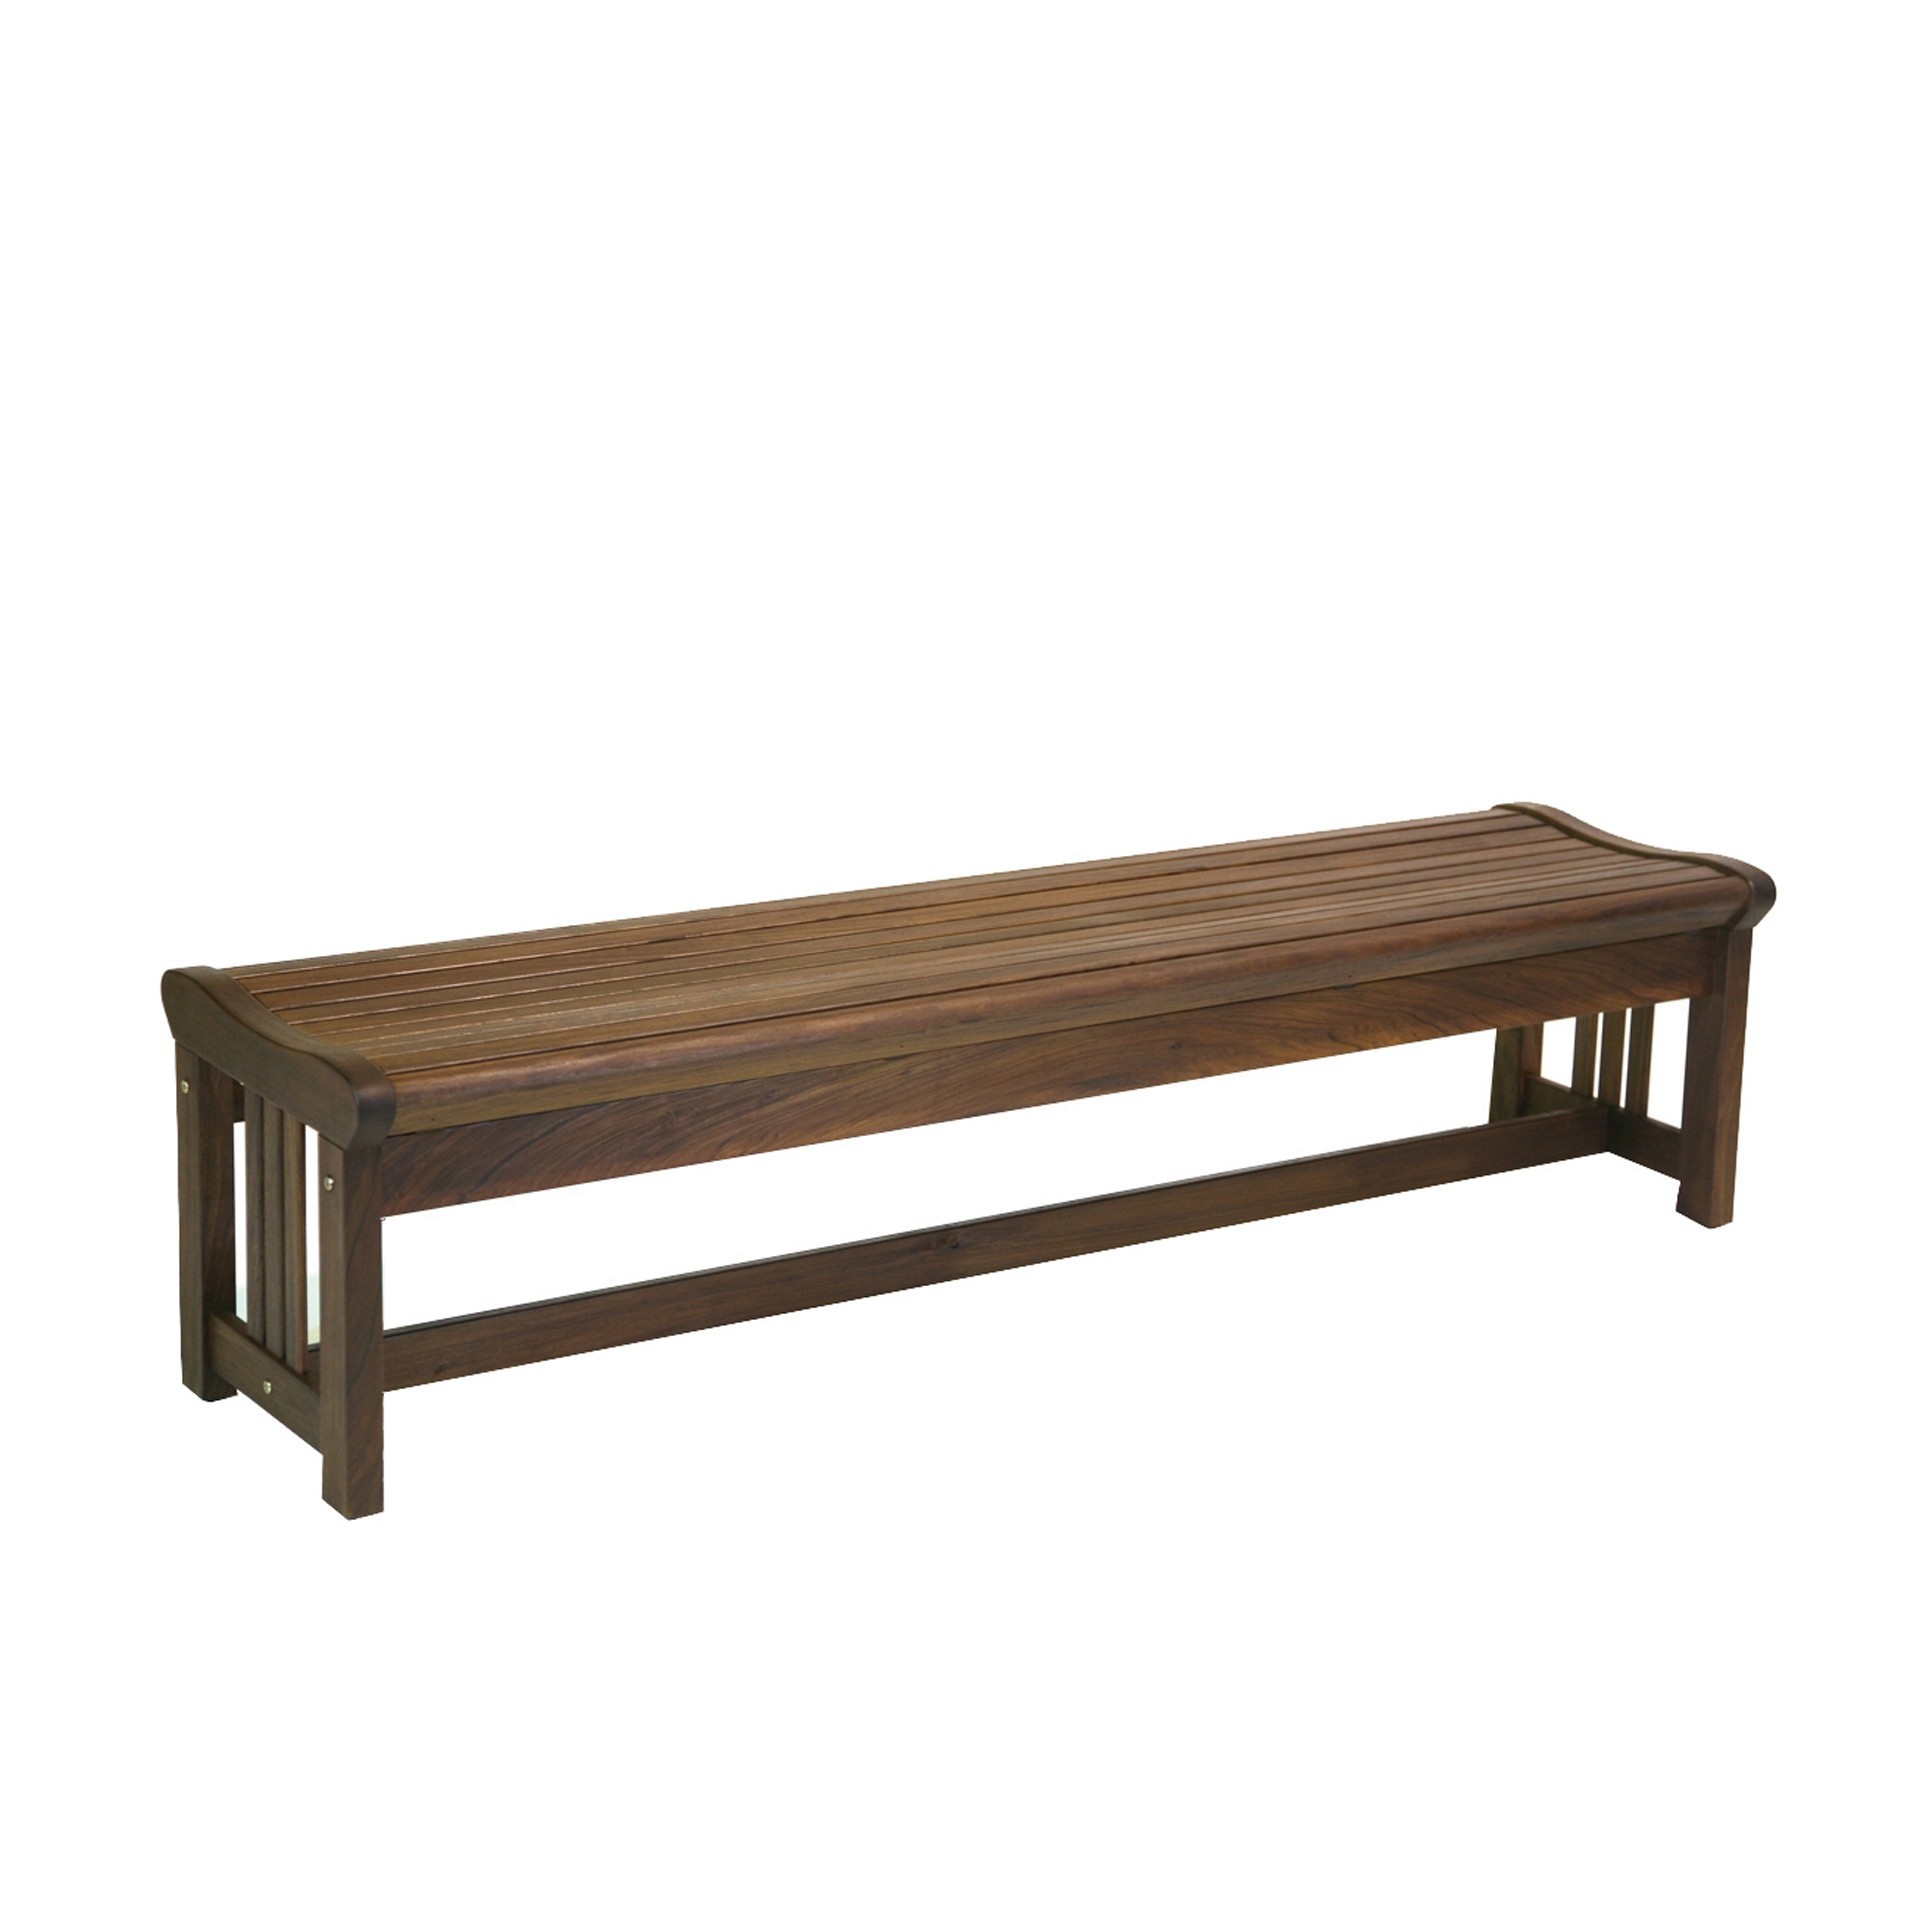 Lincoln backless bench from Hausers Patio Hausers Patio